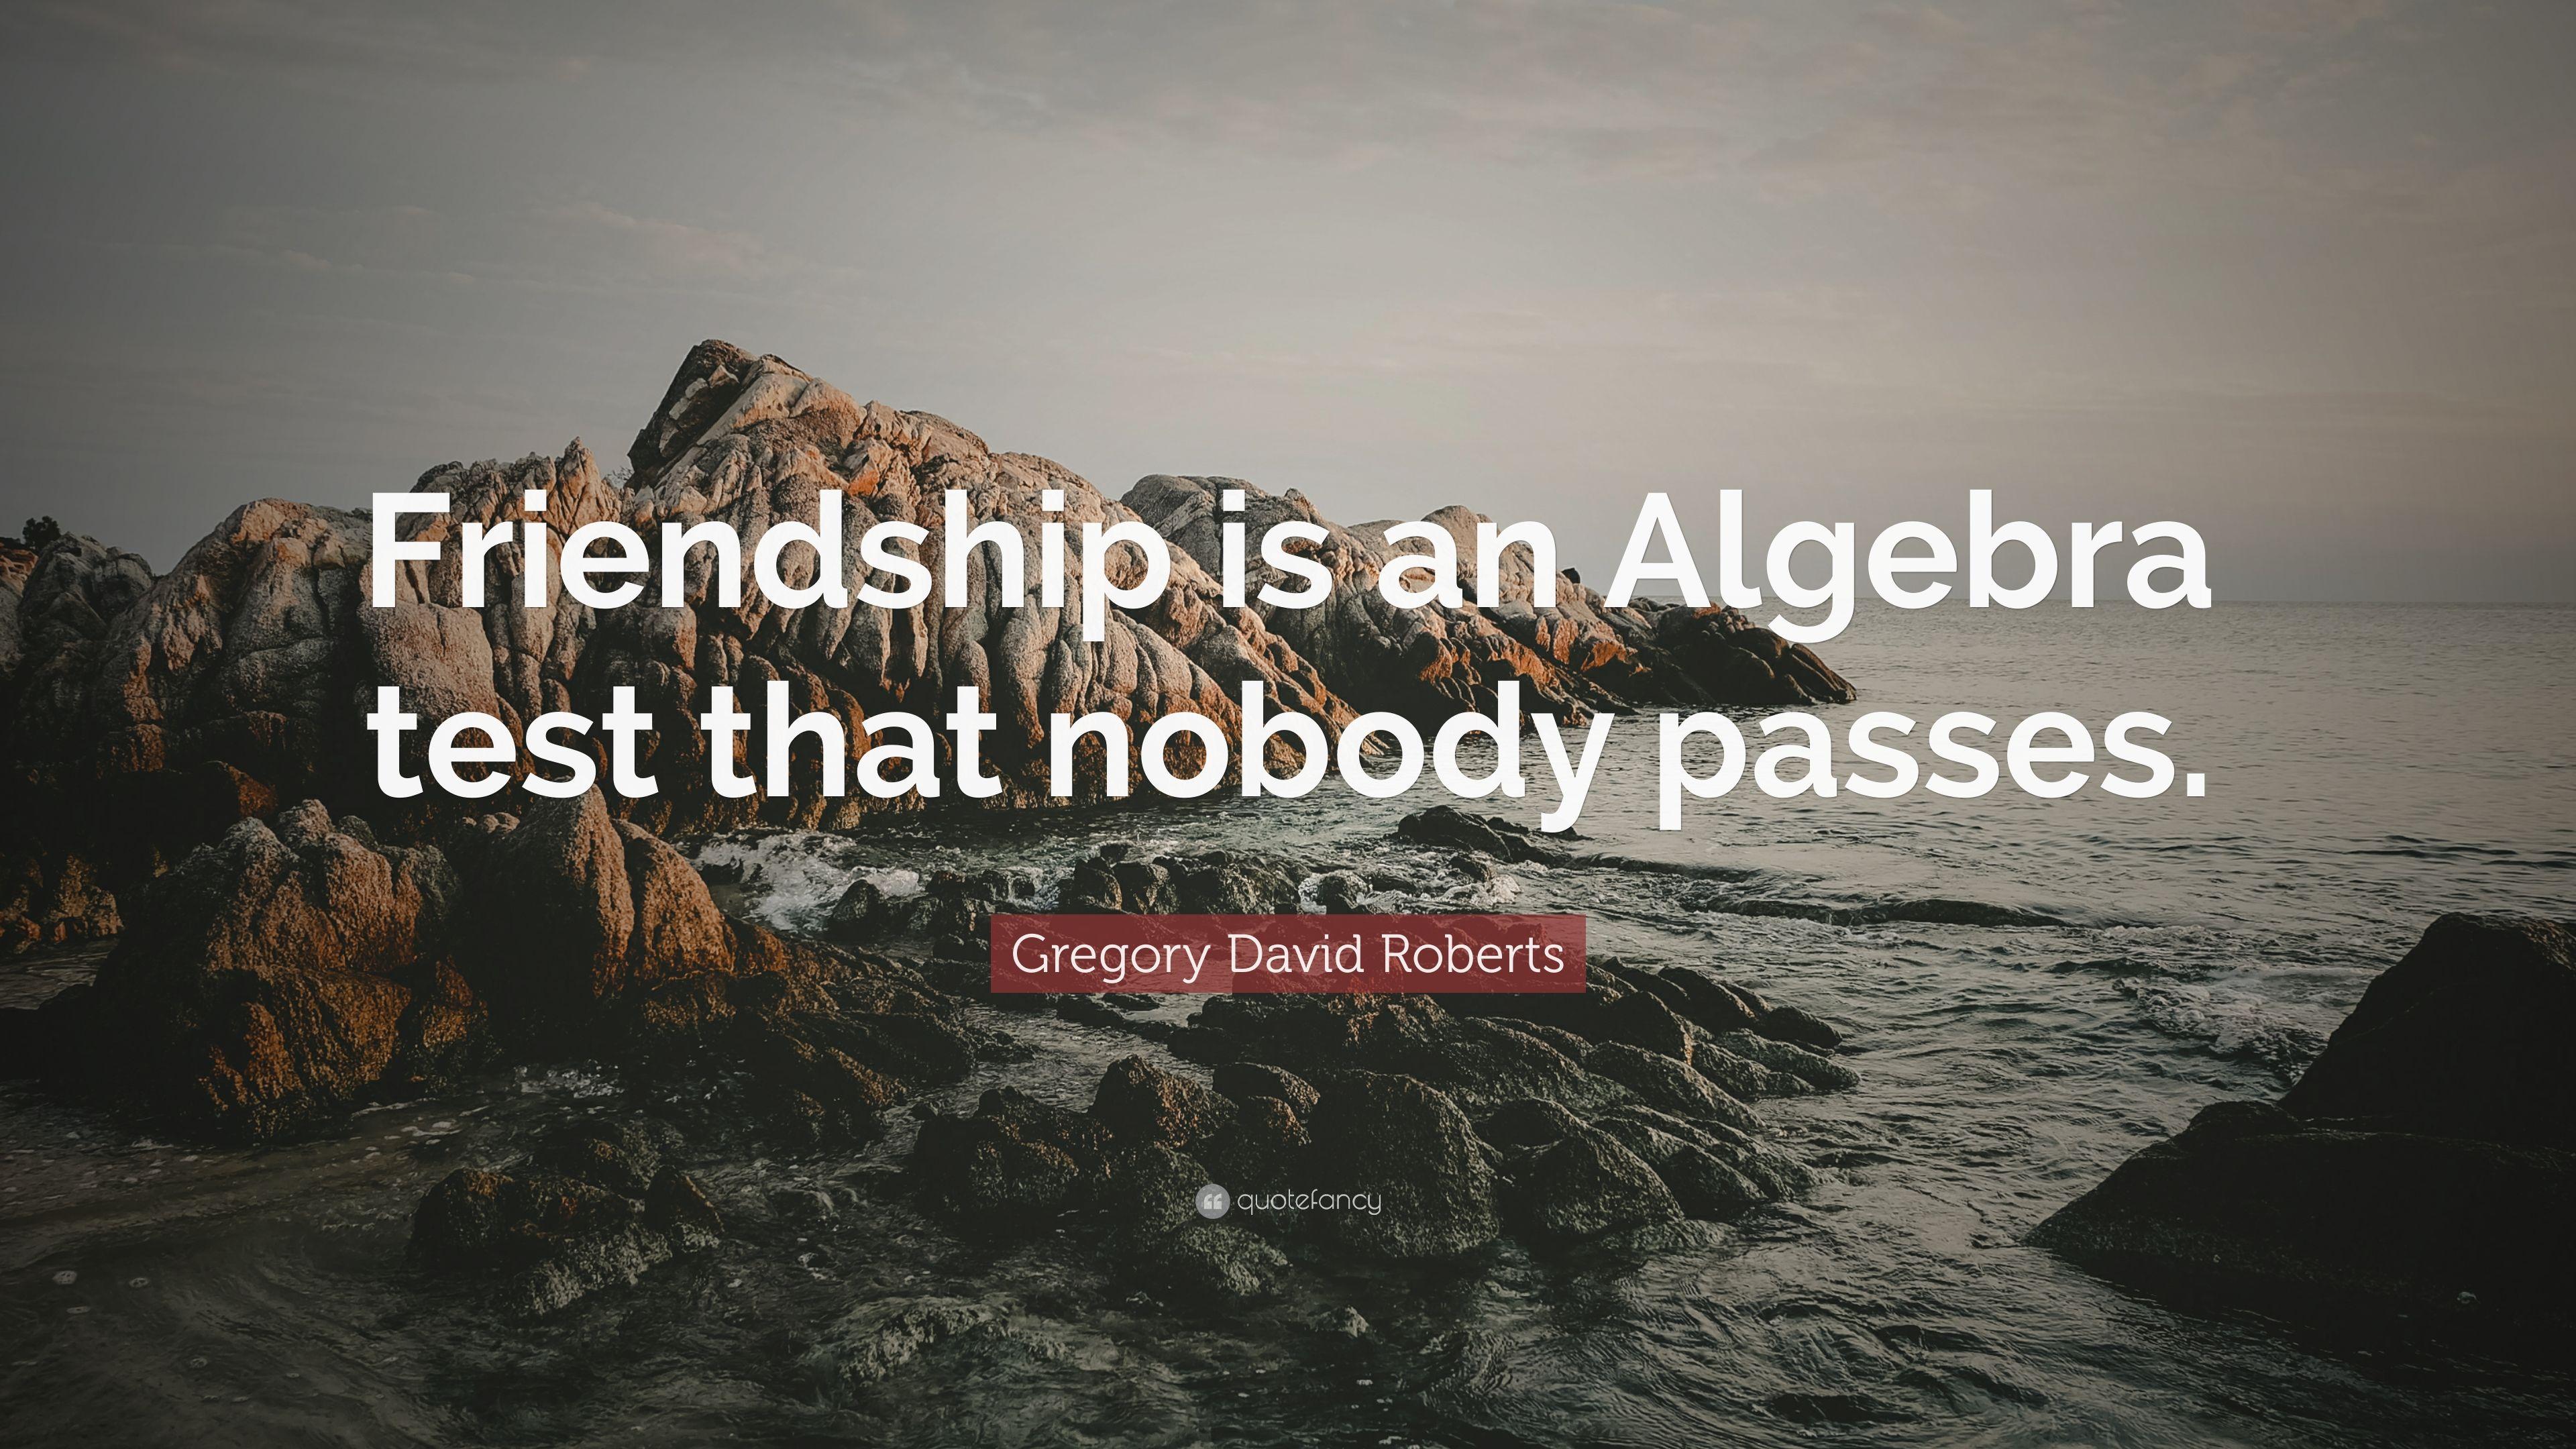 Gregory David Roberts Quote: “Friendship is an Algebra test that